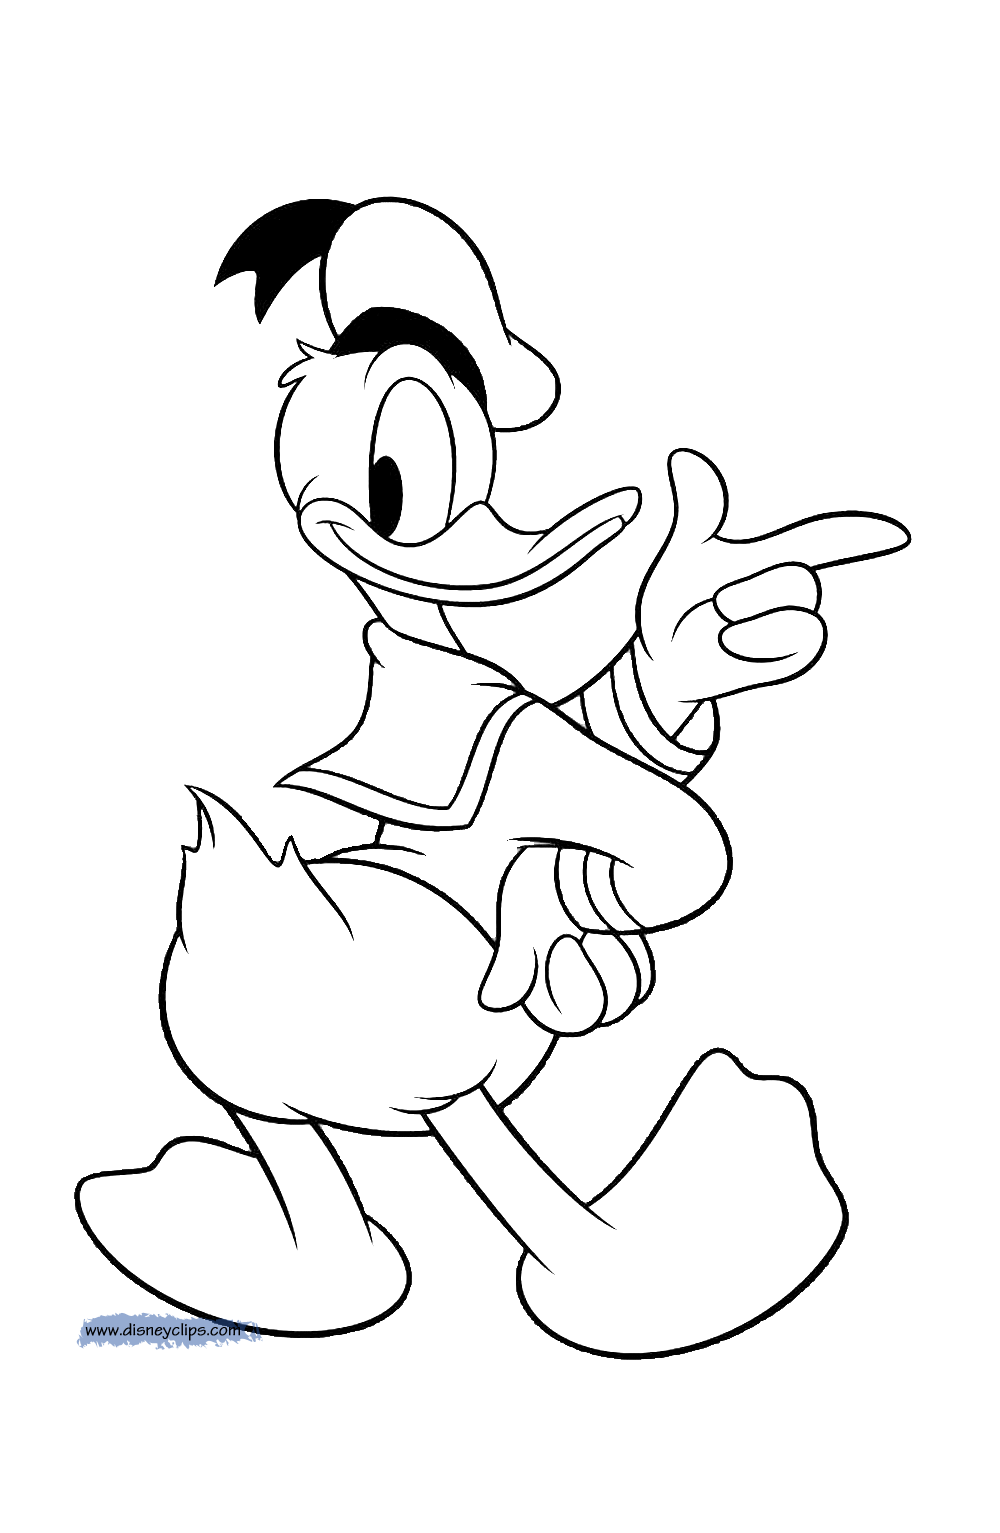 Download Donald Duck Coloring Pages (5) | Disneyclips.com